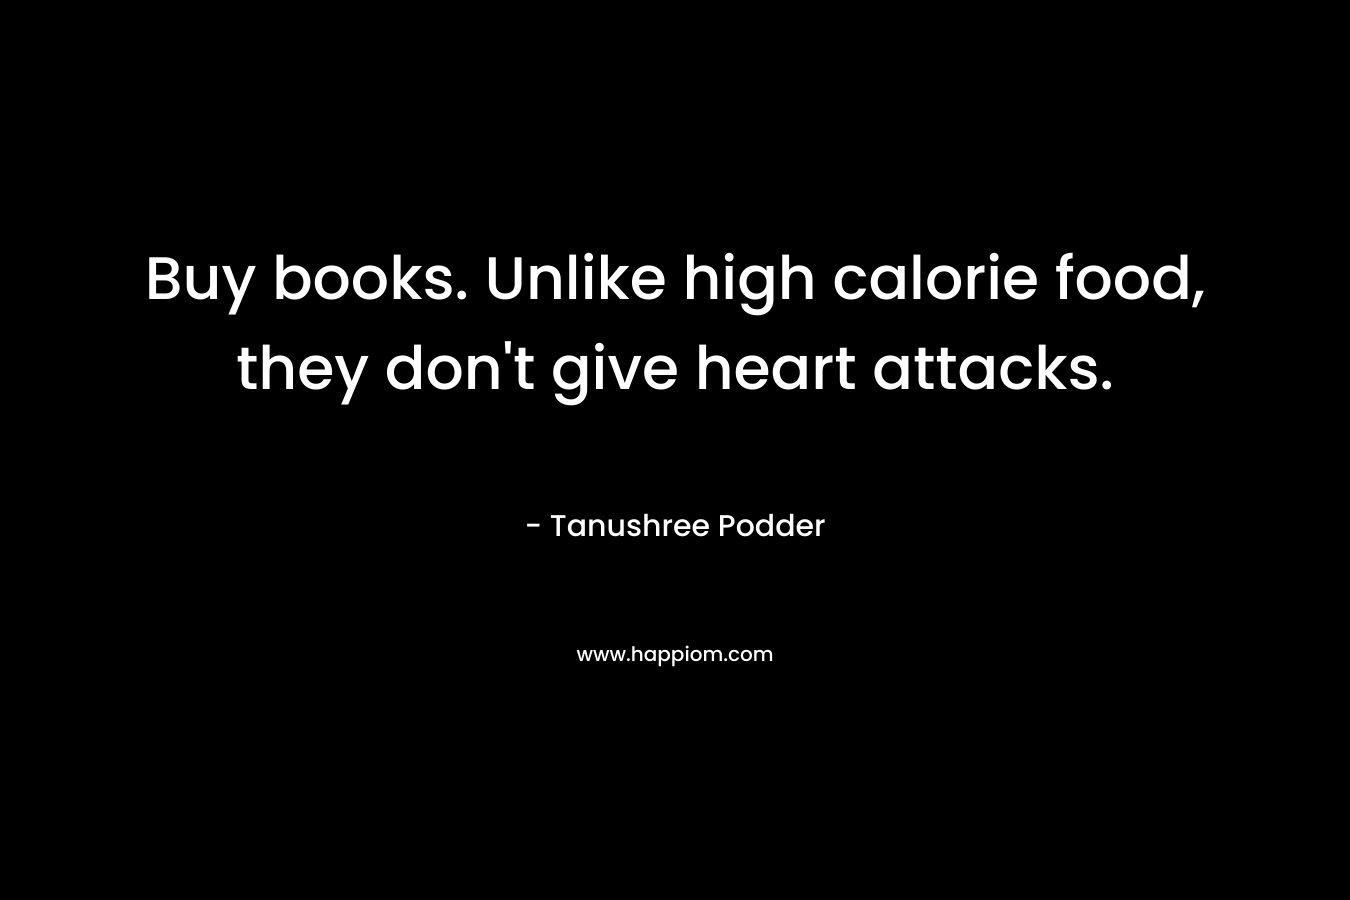 Buy books. Unlike high calorie food, they don’t give heart attacks. – Tanushree Podder